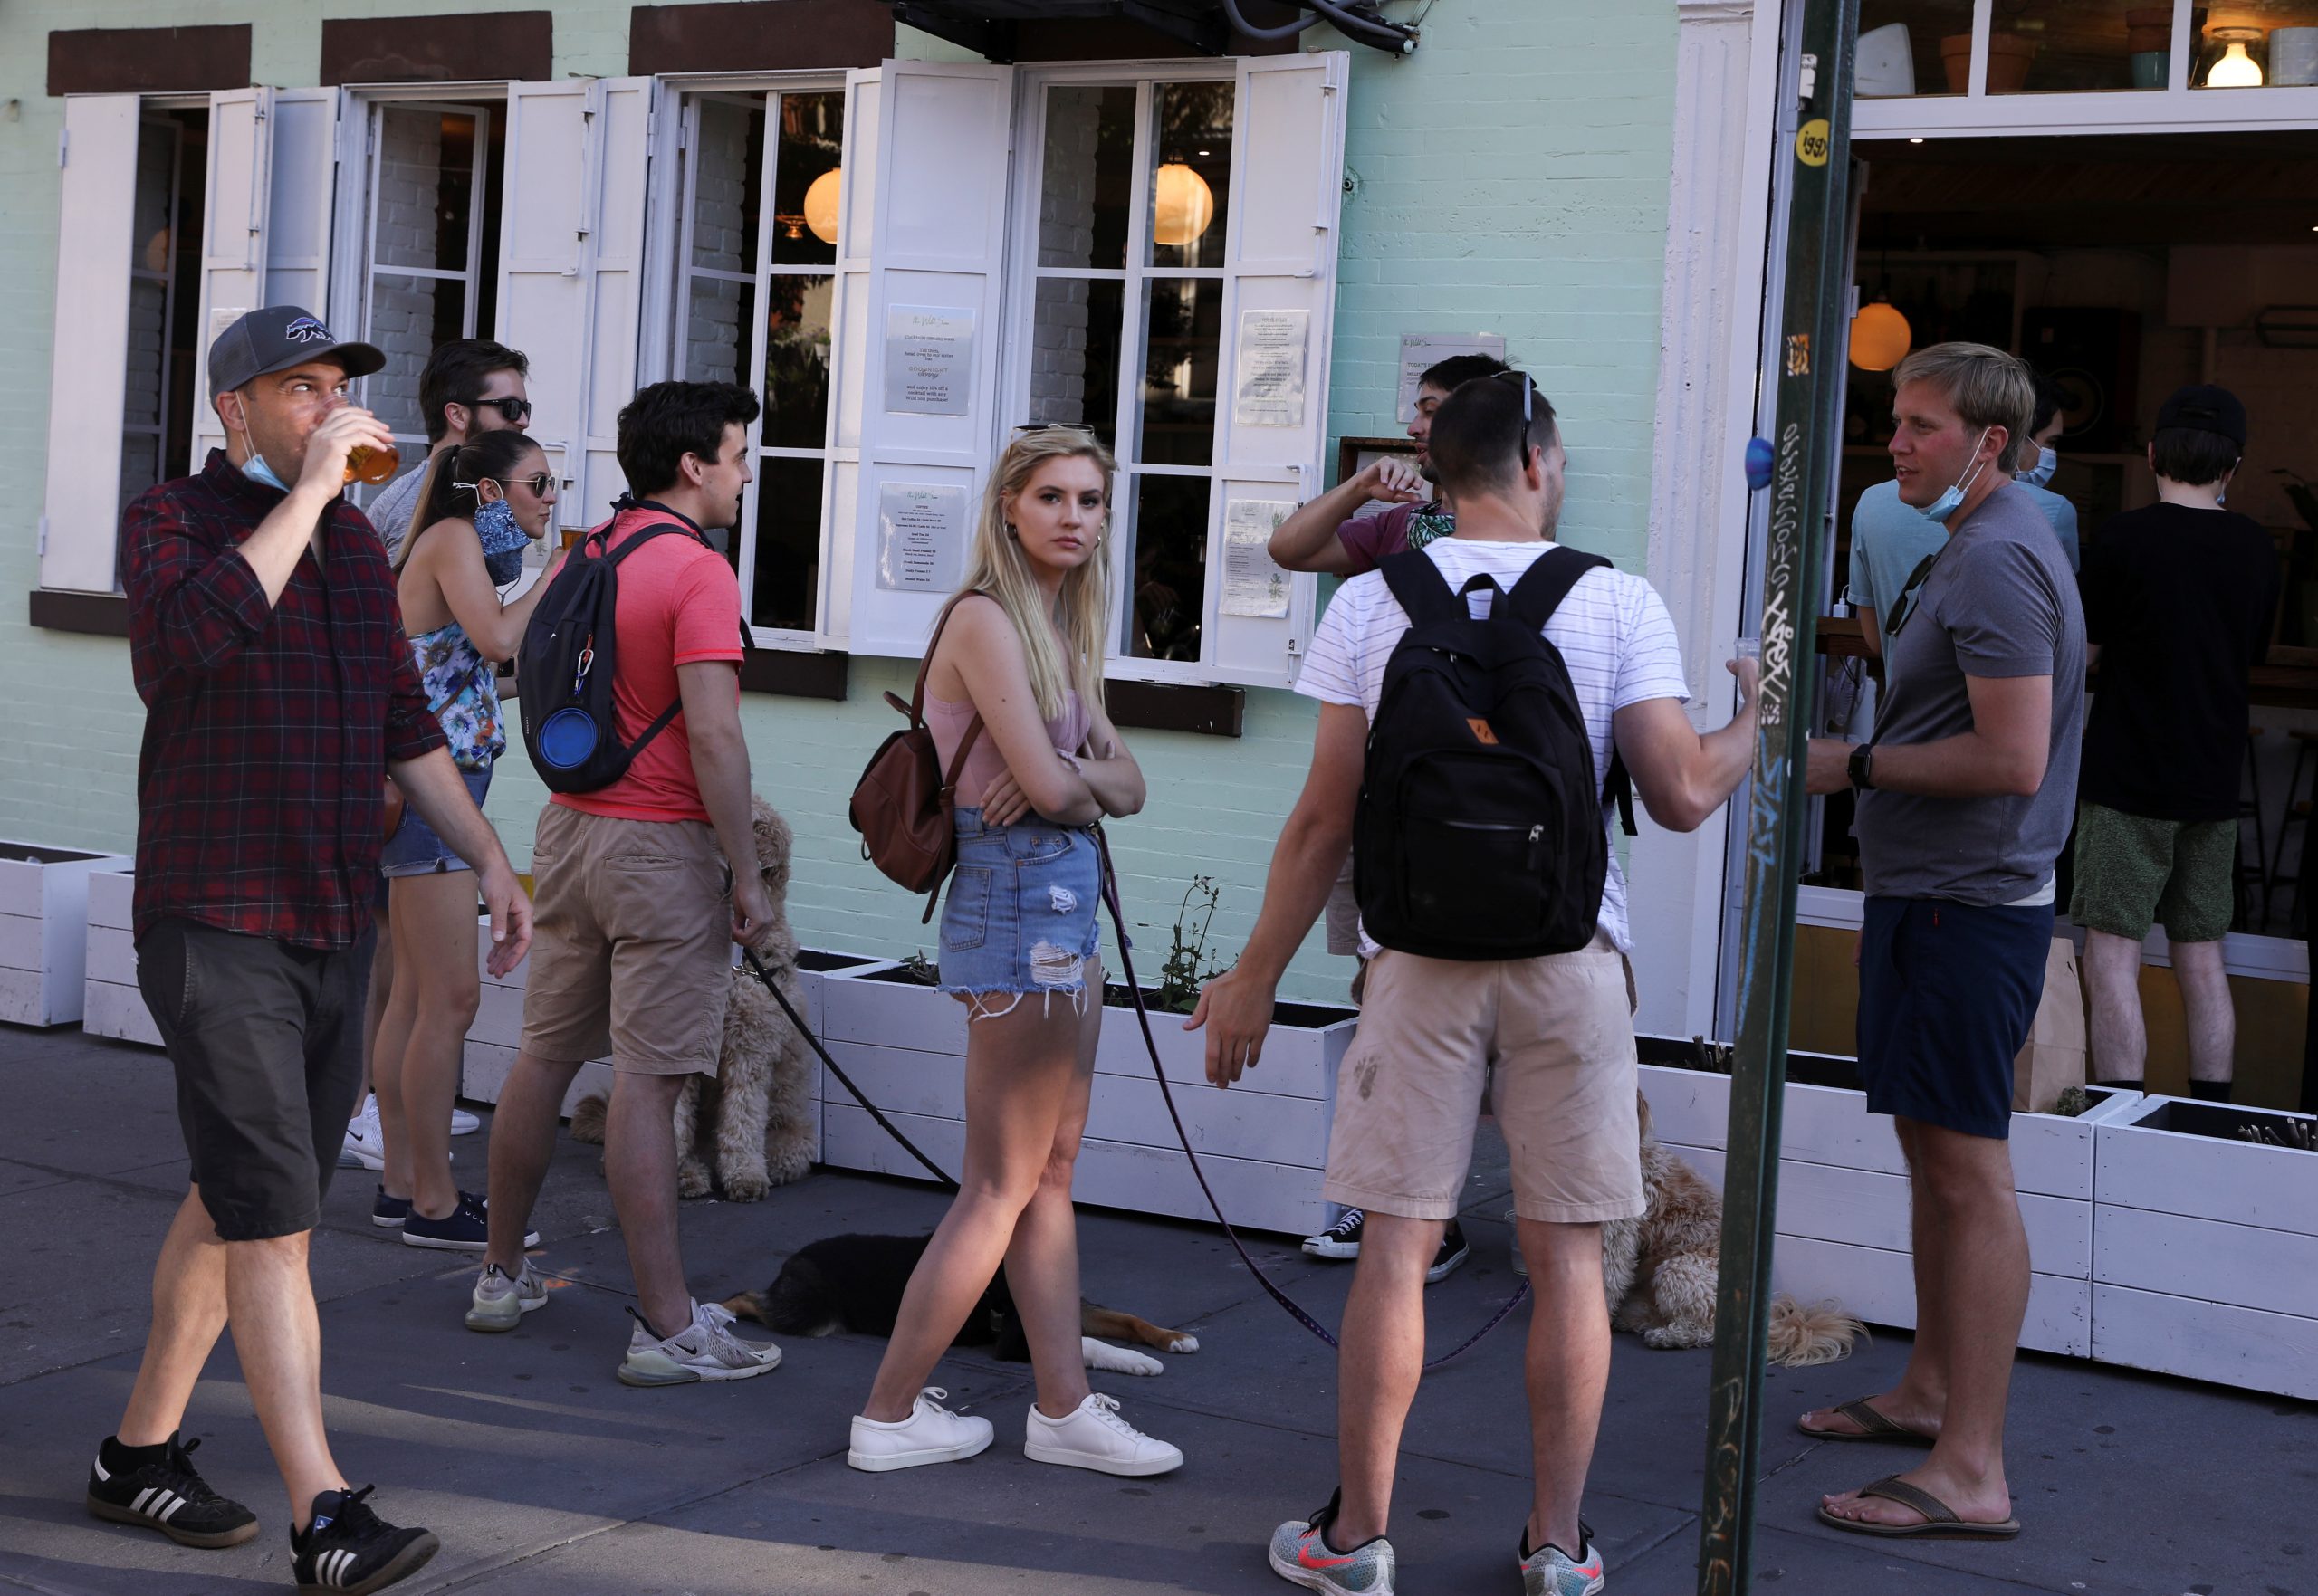 People drink outside a bar during the reopening phase following the coronavirus disease (COVID-19) outbreak